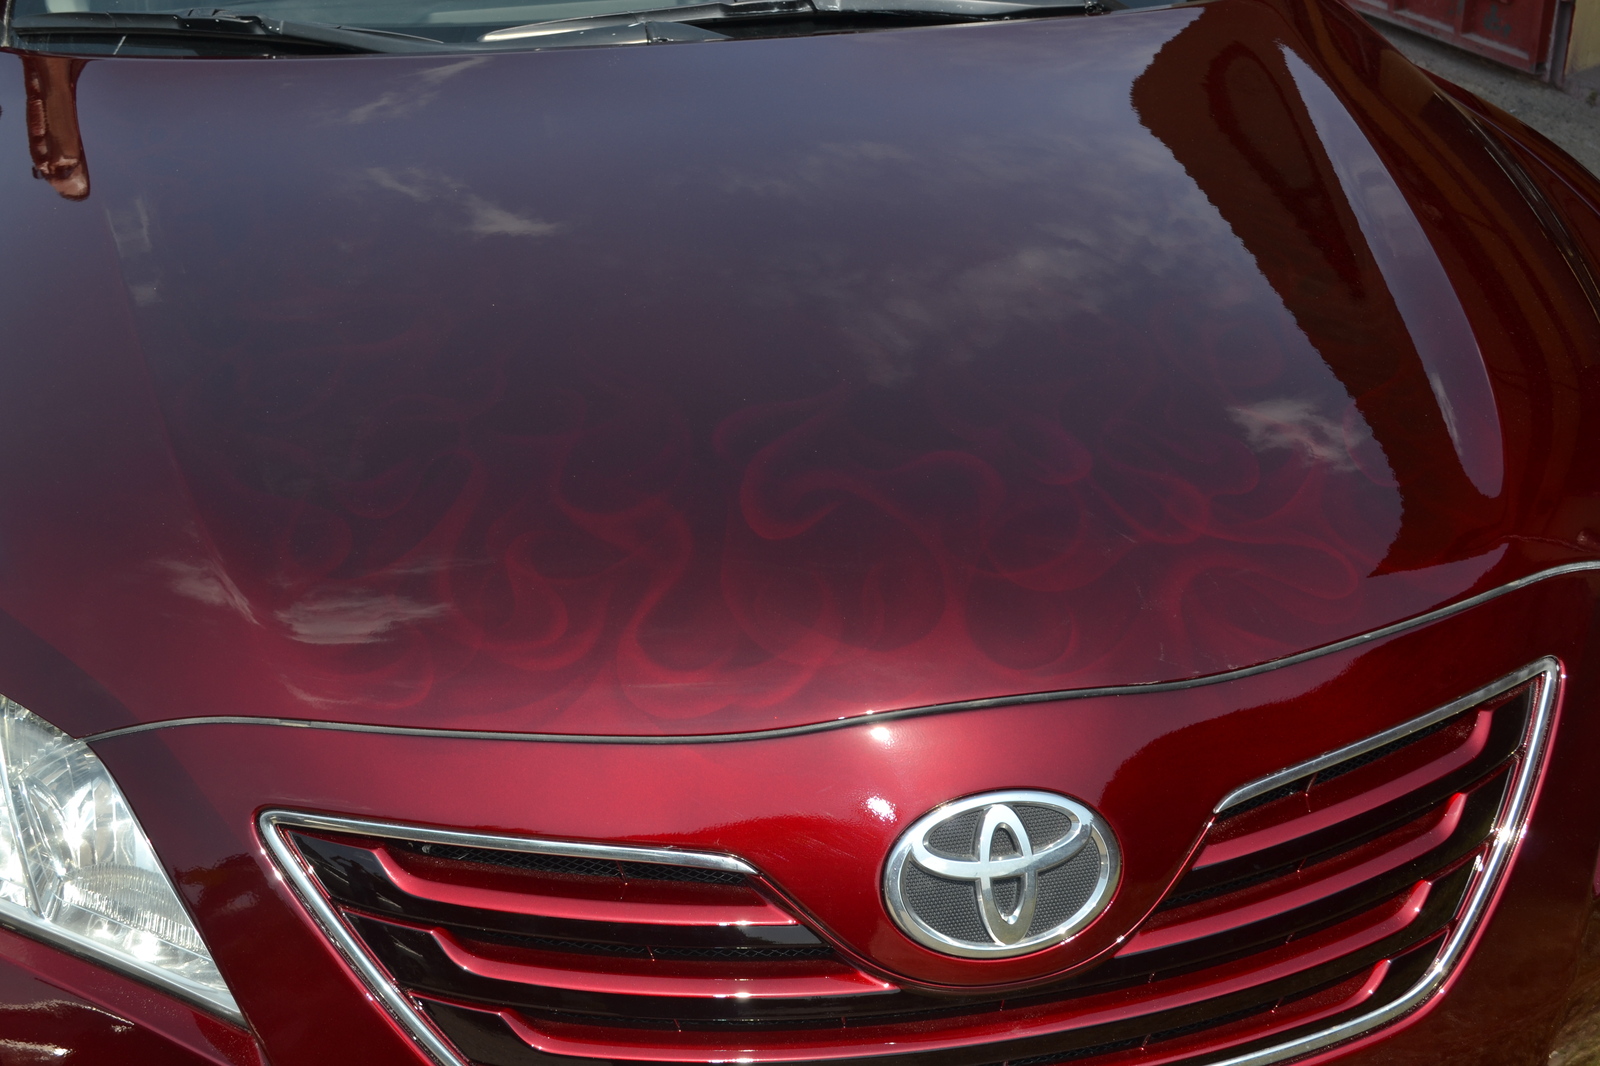 Exclusive painting Toyota Camry, candy dark cherry pikabu.monster